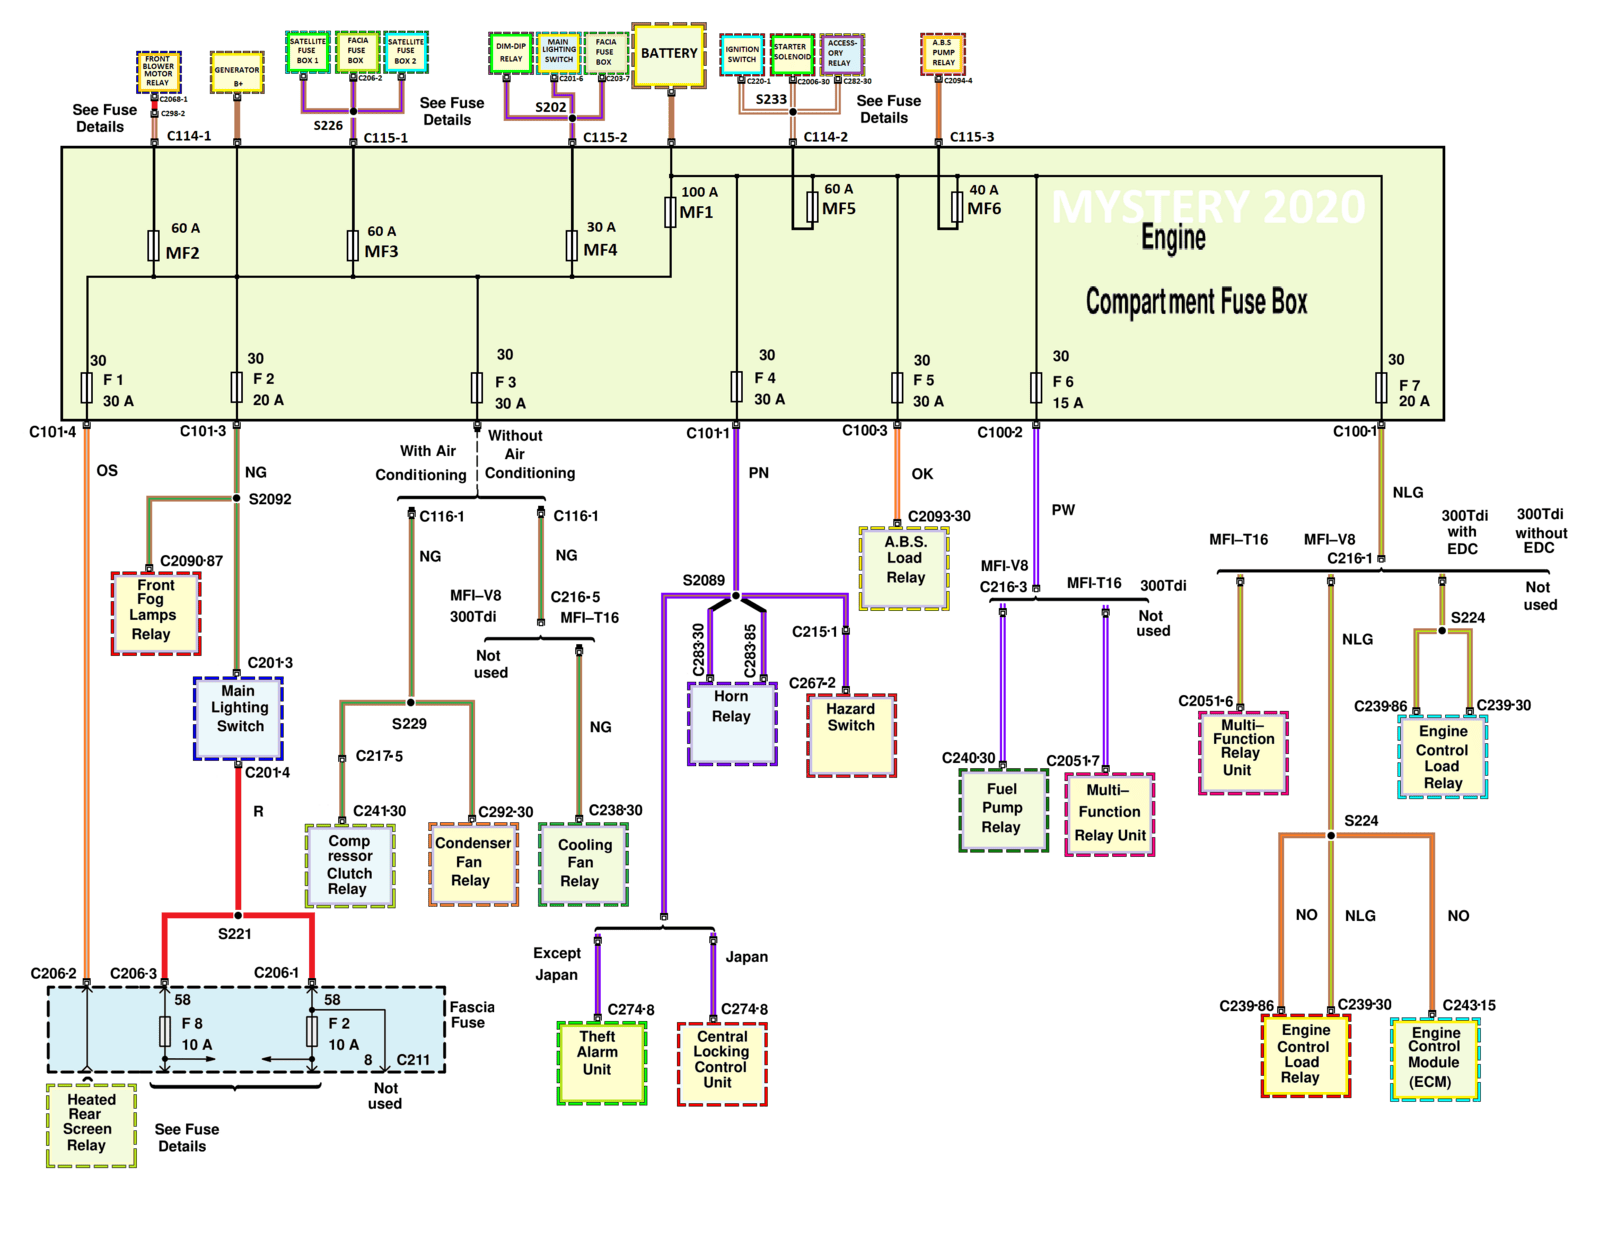 ENGINE COMPARTMENT FUSE BOX DISCO 1 97.png